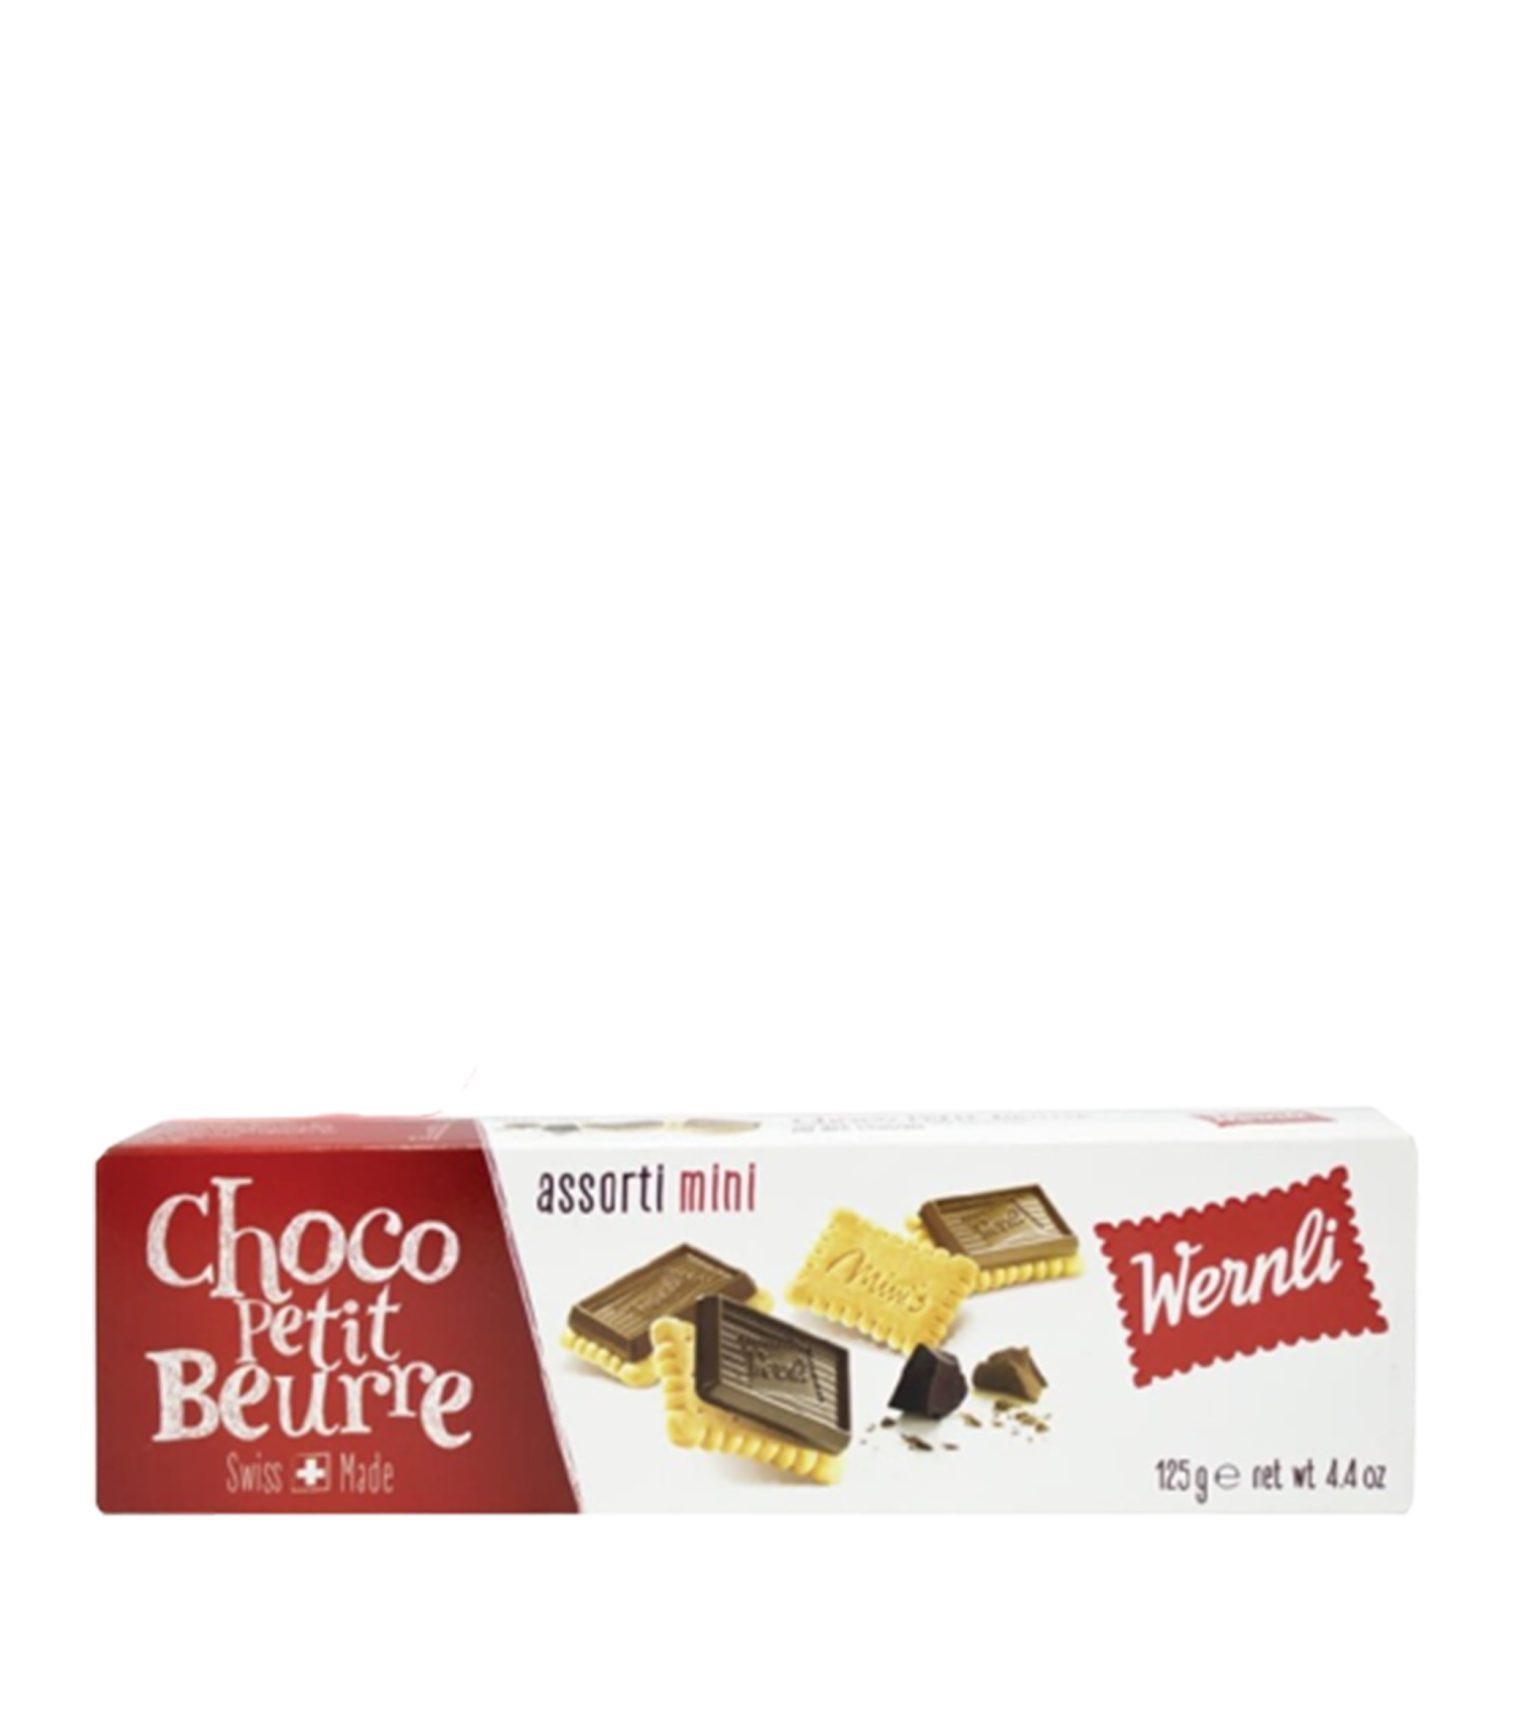 Wernli Biscuits Choco Petit Beurre 125g main image